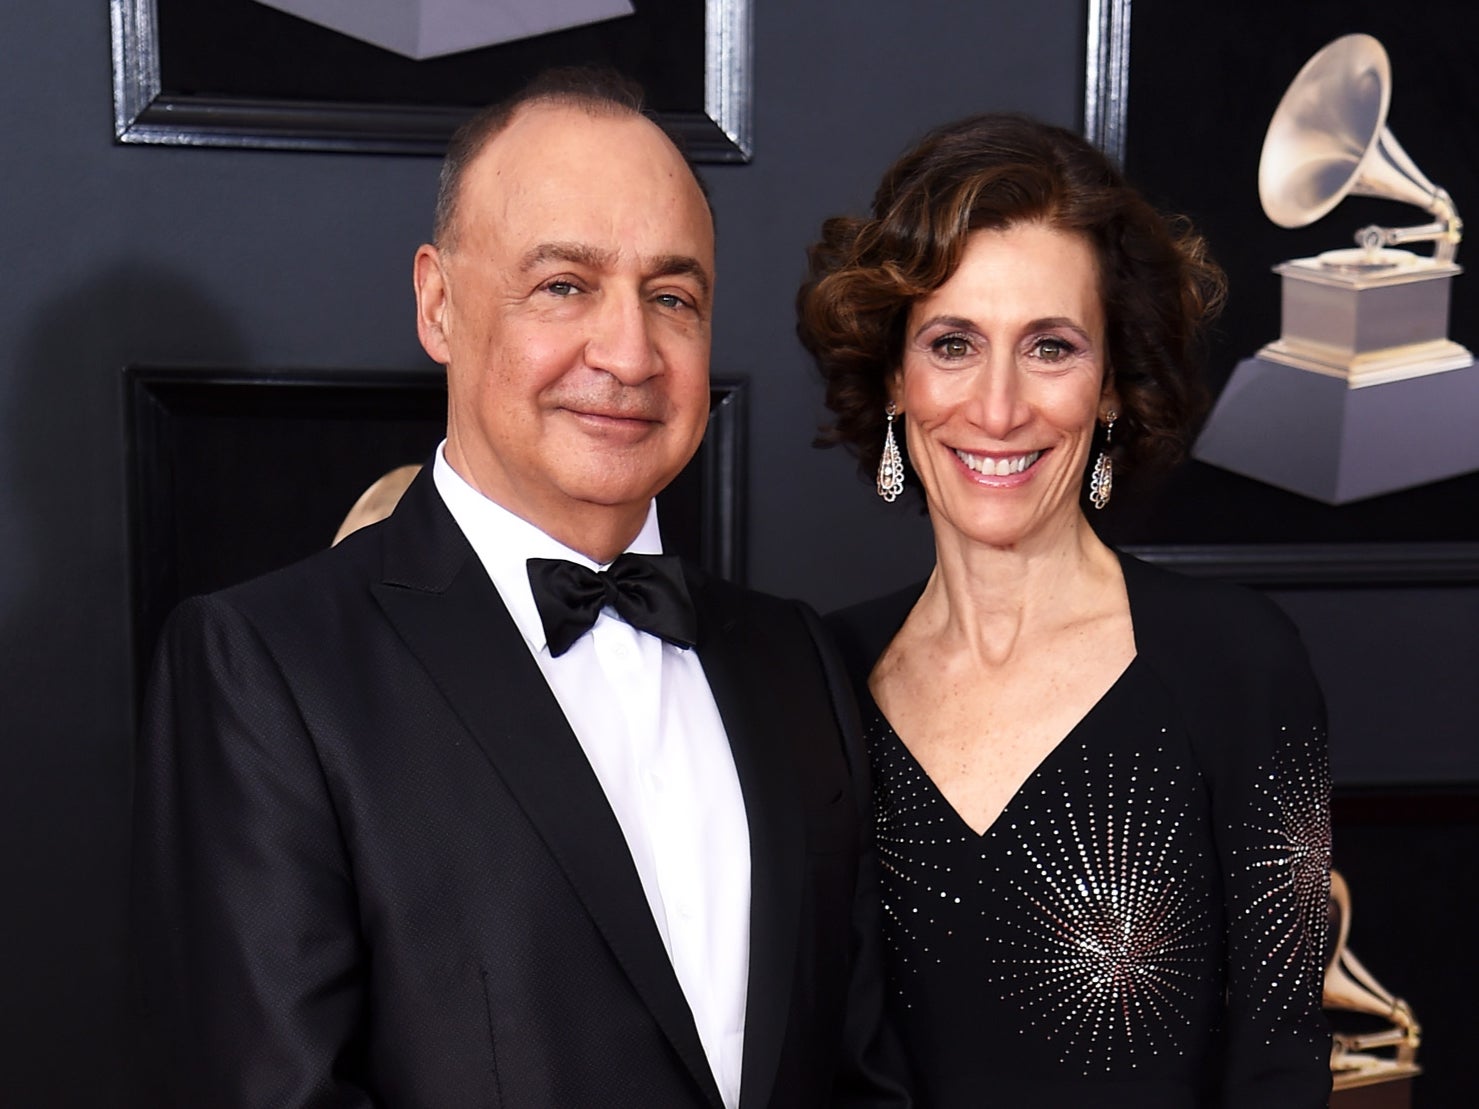 Sir Leonard Blavatnik, with his wife Emily Appelson, was named the richest person in the country